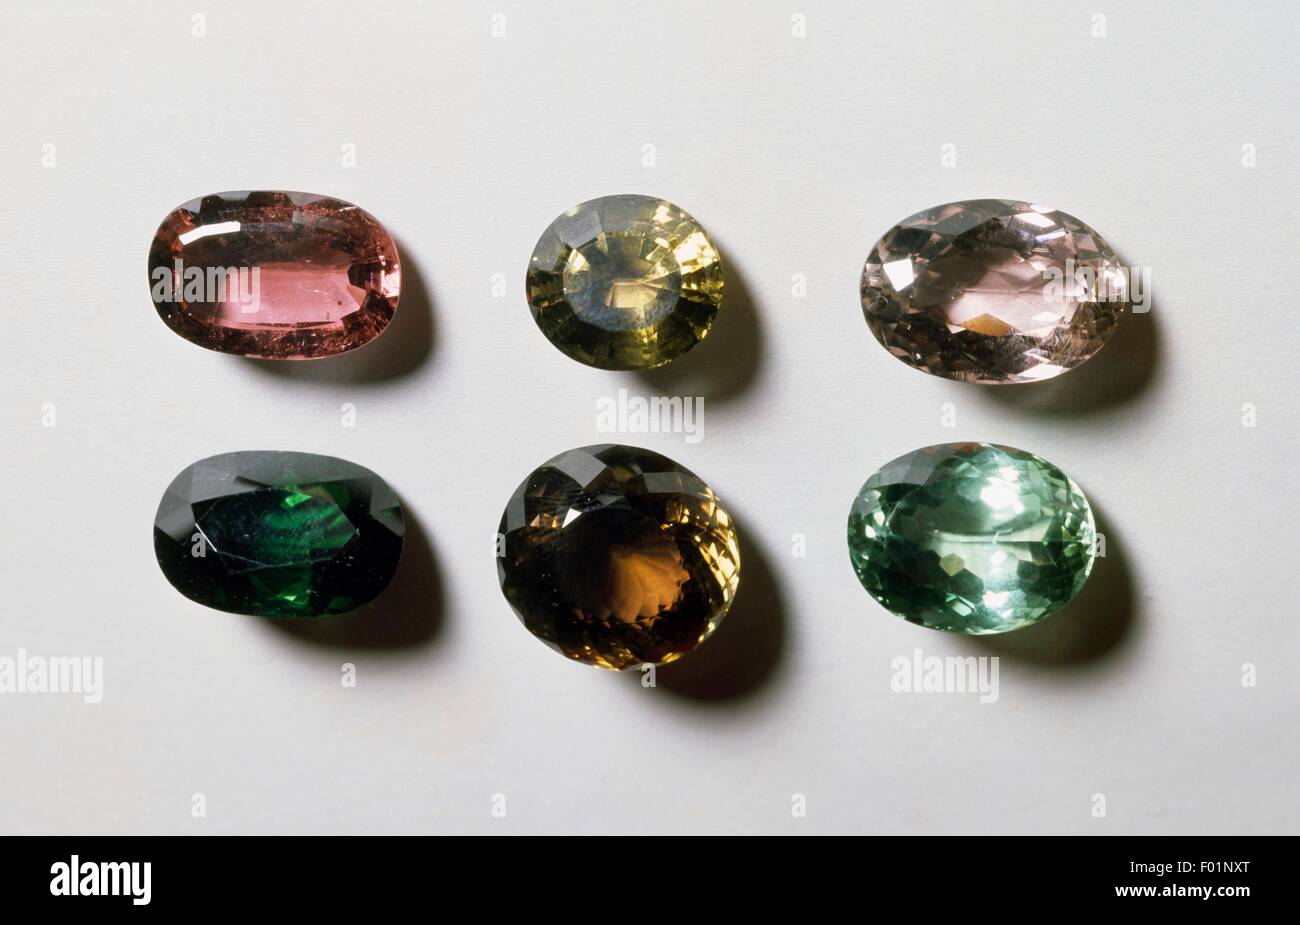 Tourmaline specimens, silicate, in different colors and cuts. Stock Photo